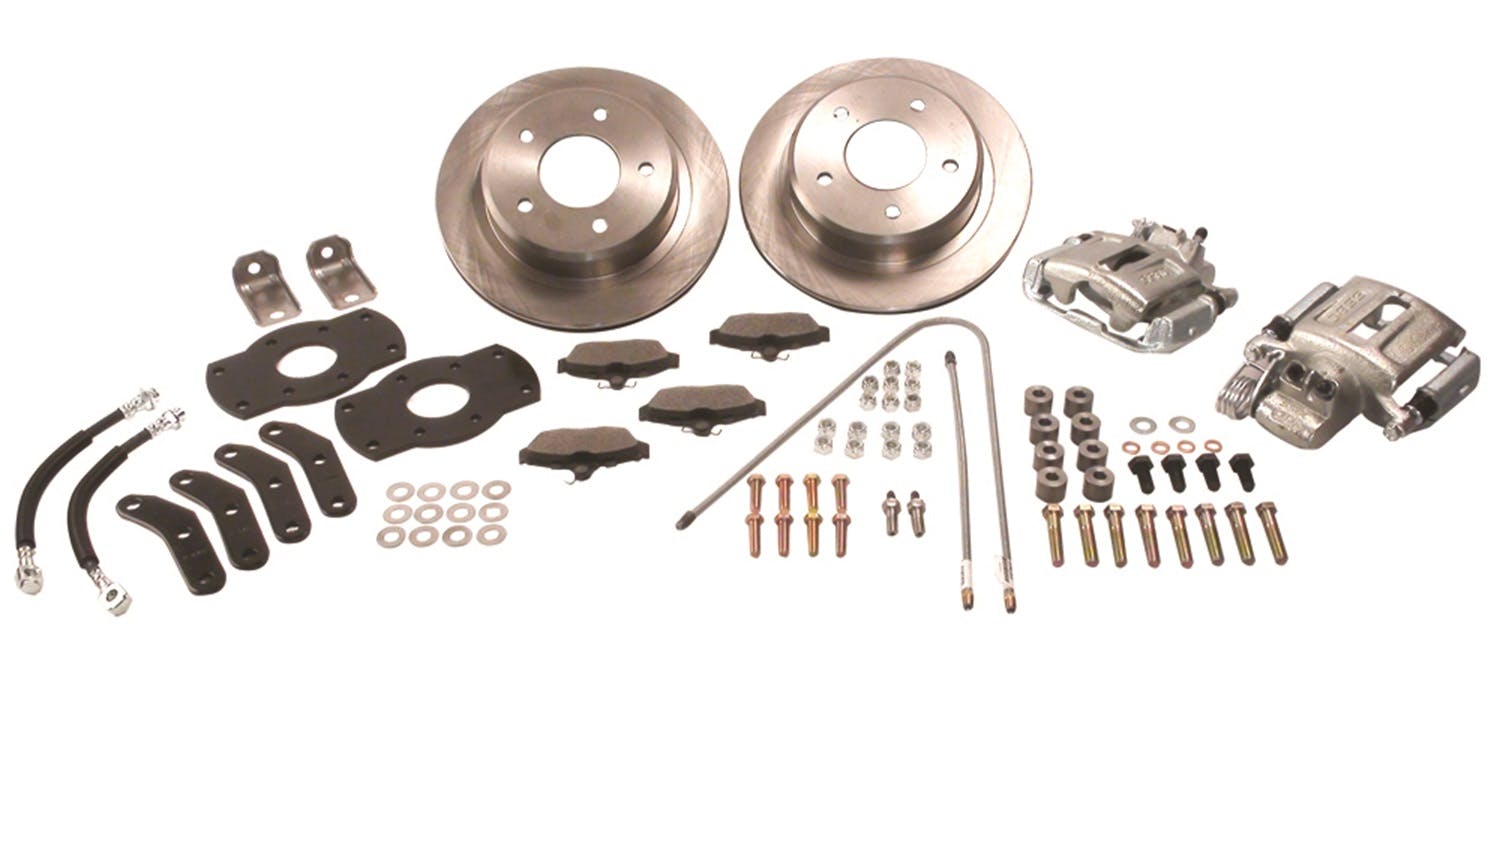 Stainless Steel Brakes A128-6R Kit A128-6 w/red calipers